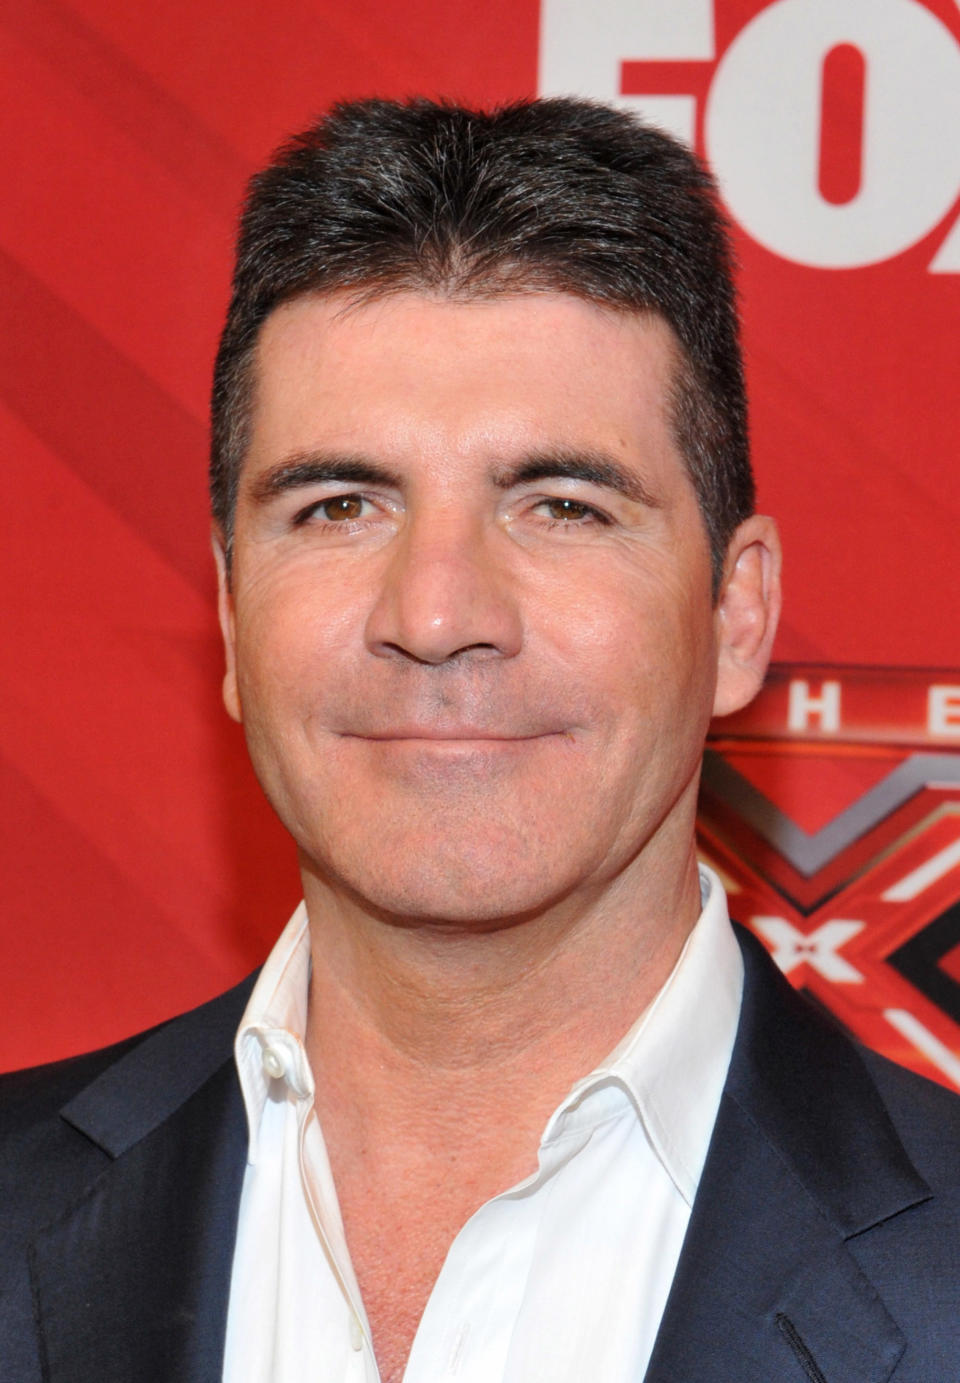 <div class="caption-credit"> Photo by: (Photo by Mark Davis/Getty Images)</div>"To me, Botox is no more unusual than toothpaste," Simon Cowell admitted to <i>Glamour Magazine</i>. "It works, you do it once a year - who cares?"